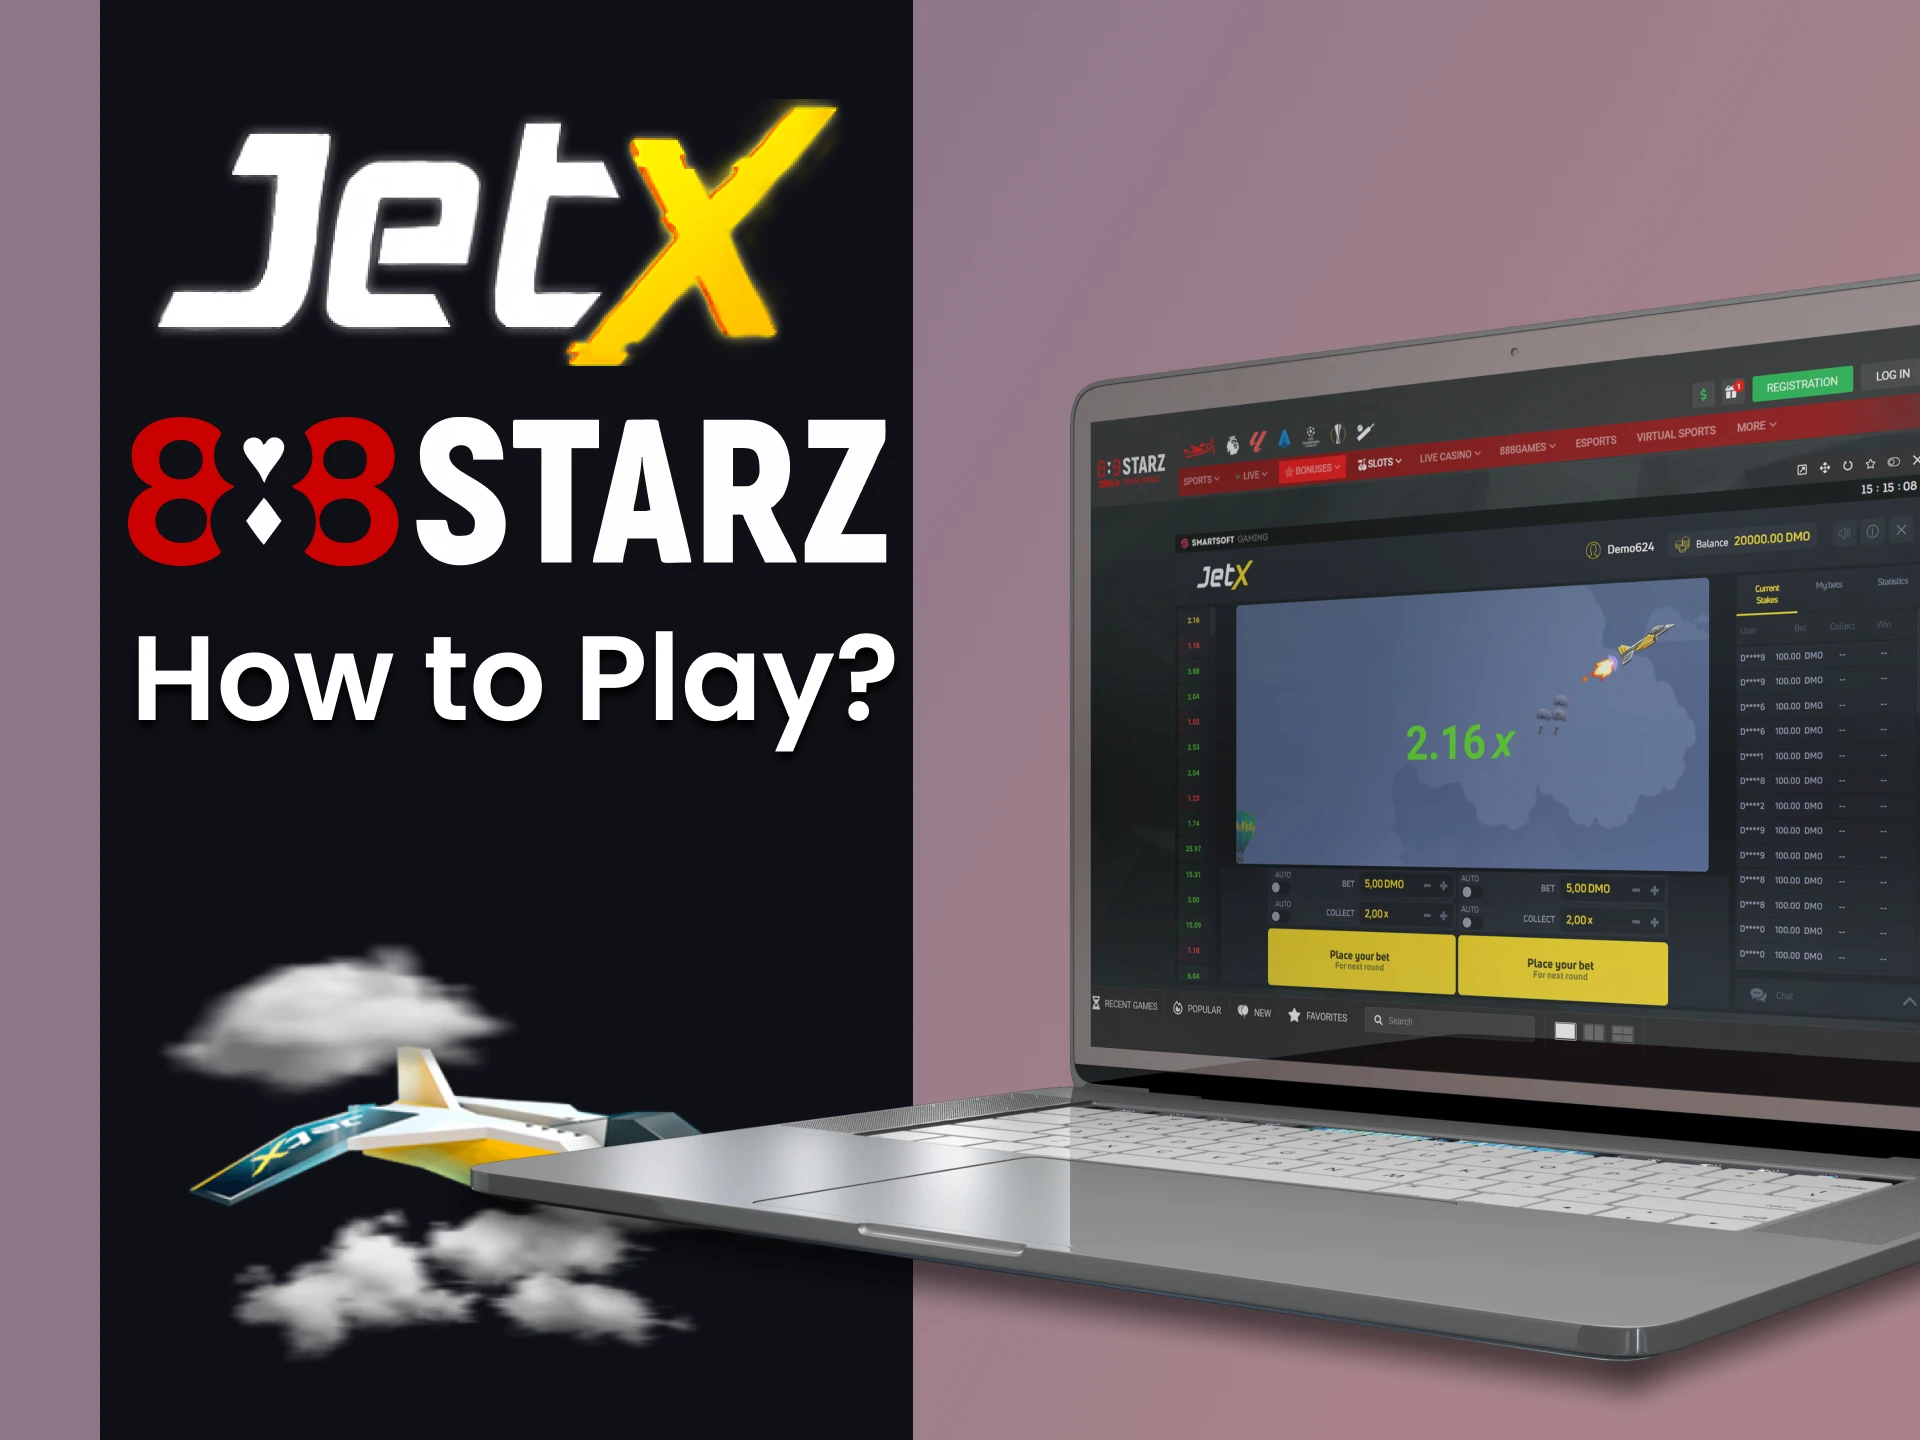 In the games section of the 888starz website you will find JetX.